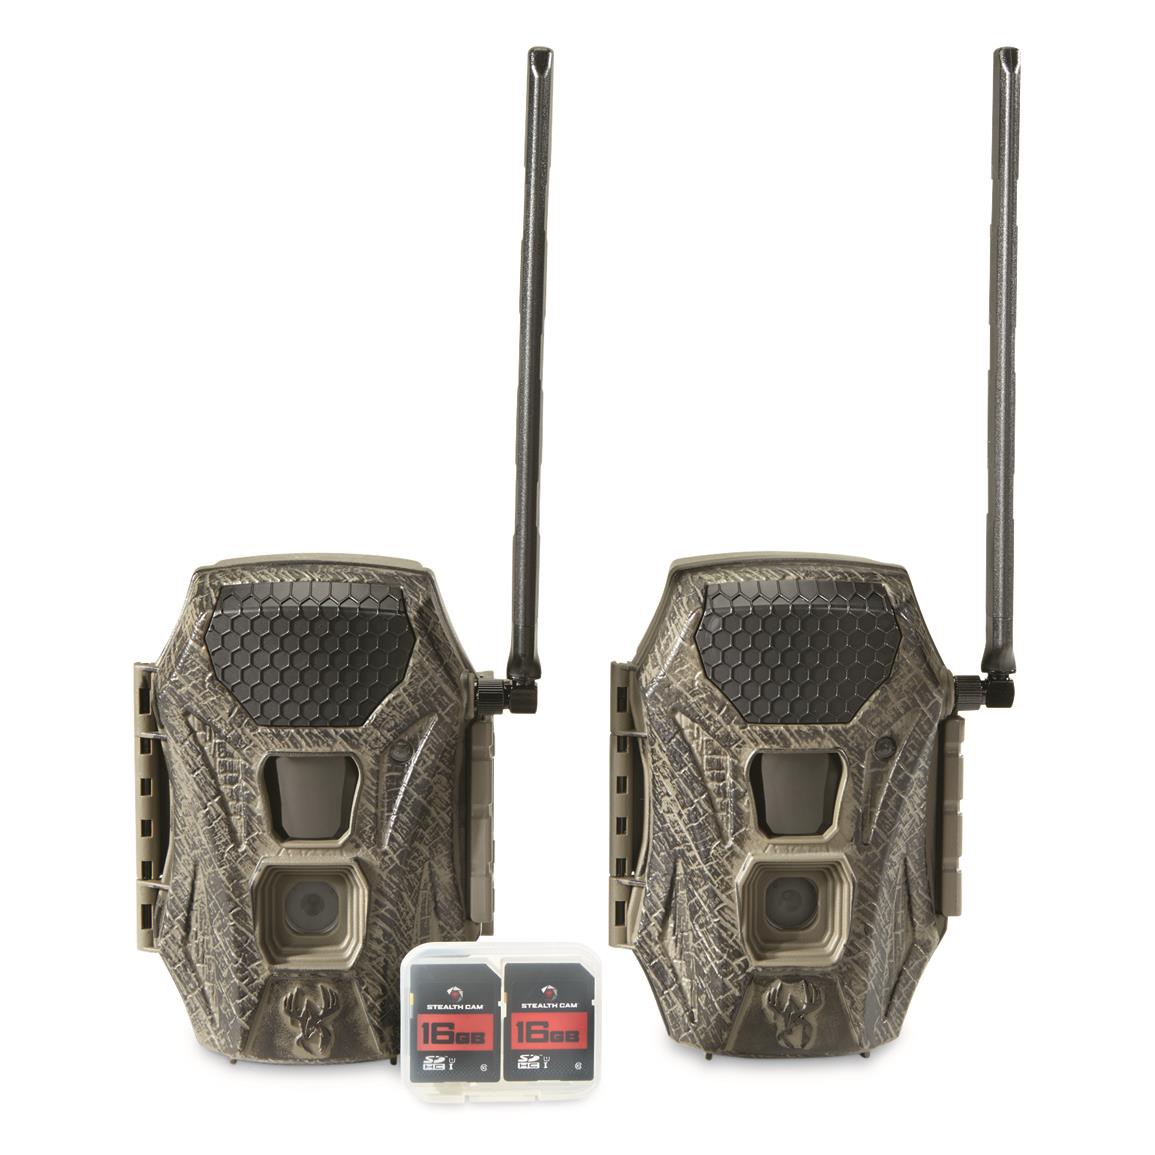 Wildgame Innovations Terra Dual Network Cellular Trail/Game Camera Kit with SD Cards, 2 Pack